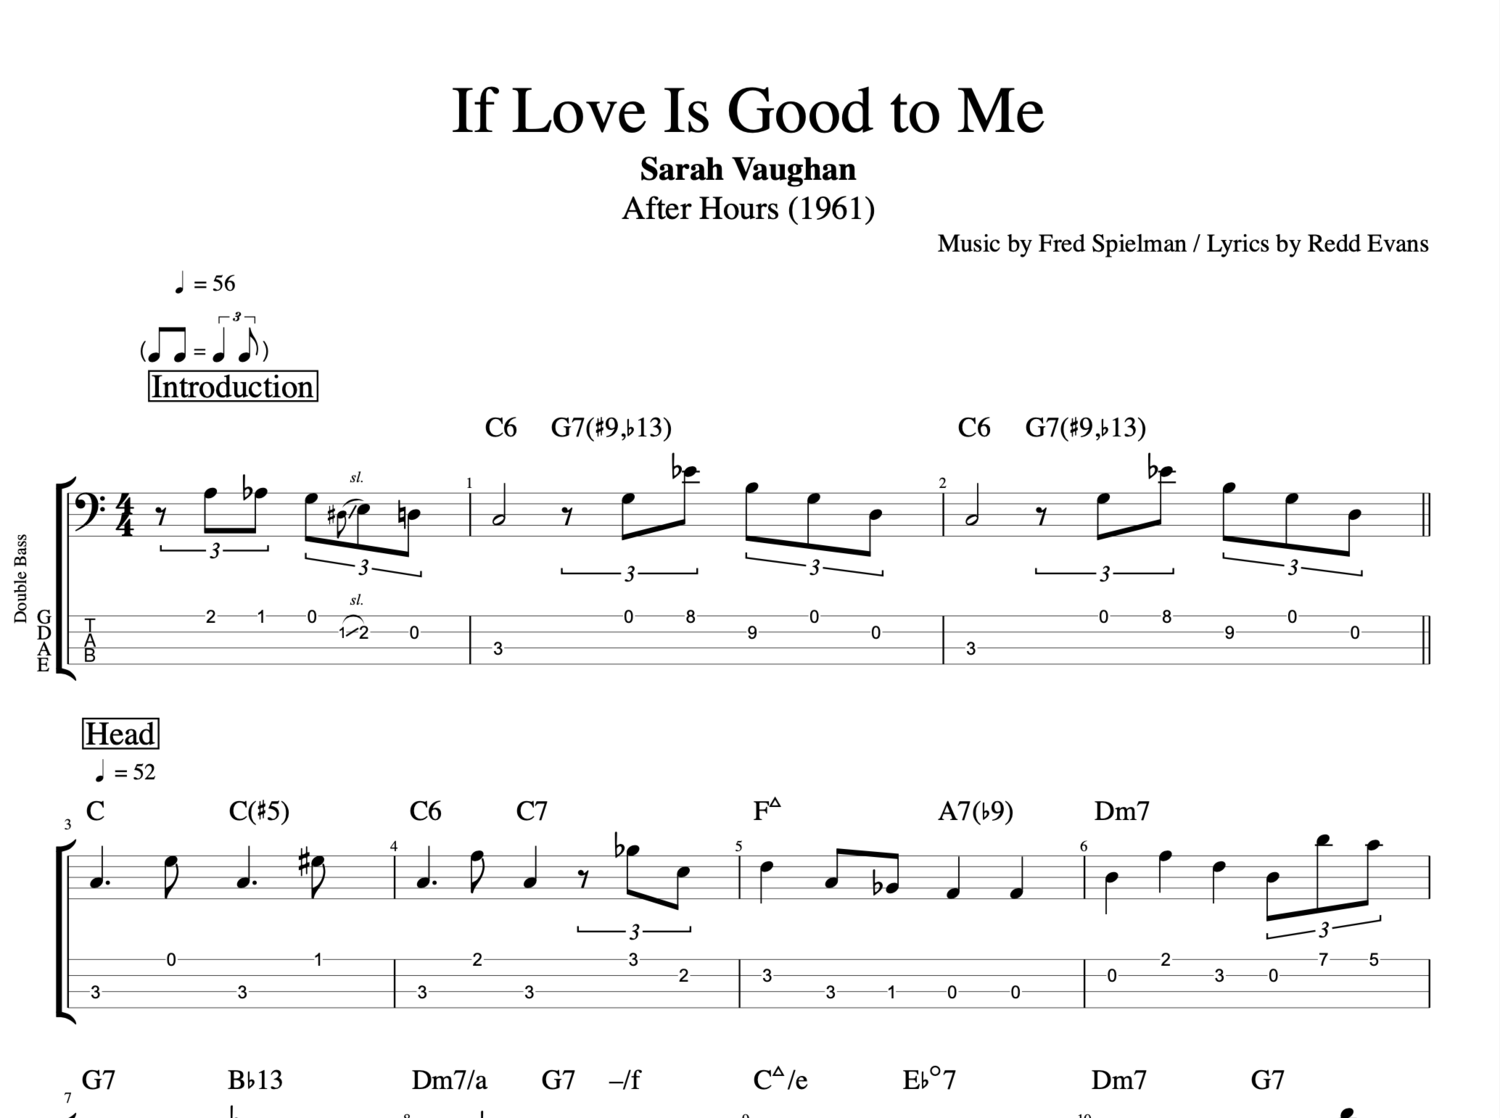 GIA Publications - Your Love Defends Me - Downloadable Chord Chart/Lead  Sheet